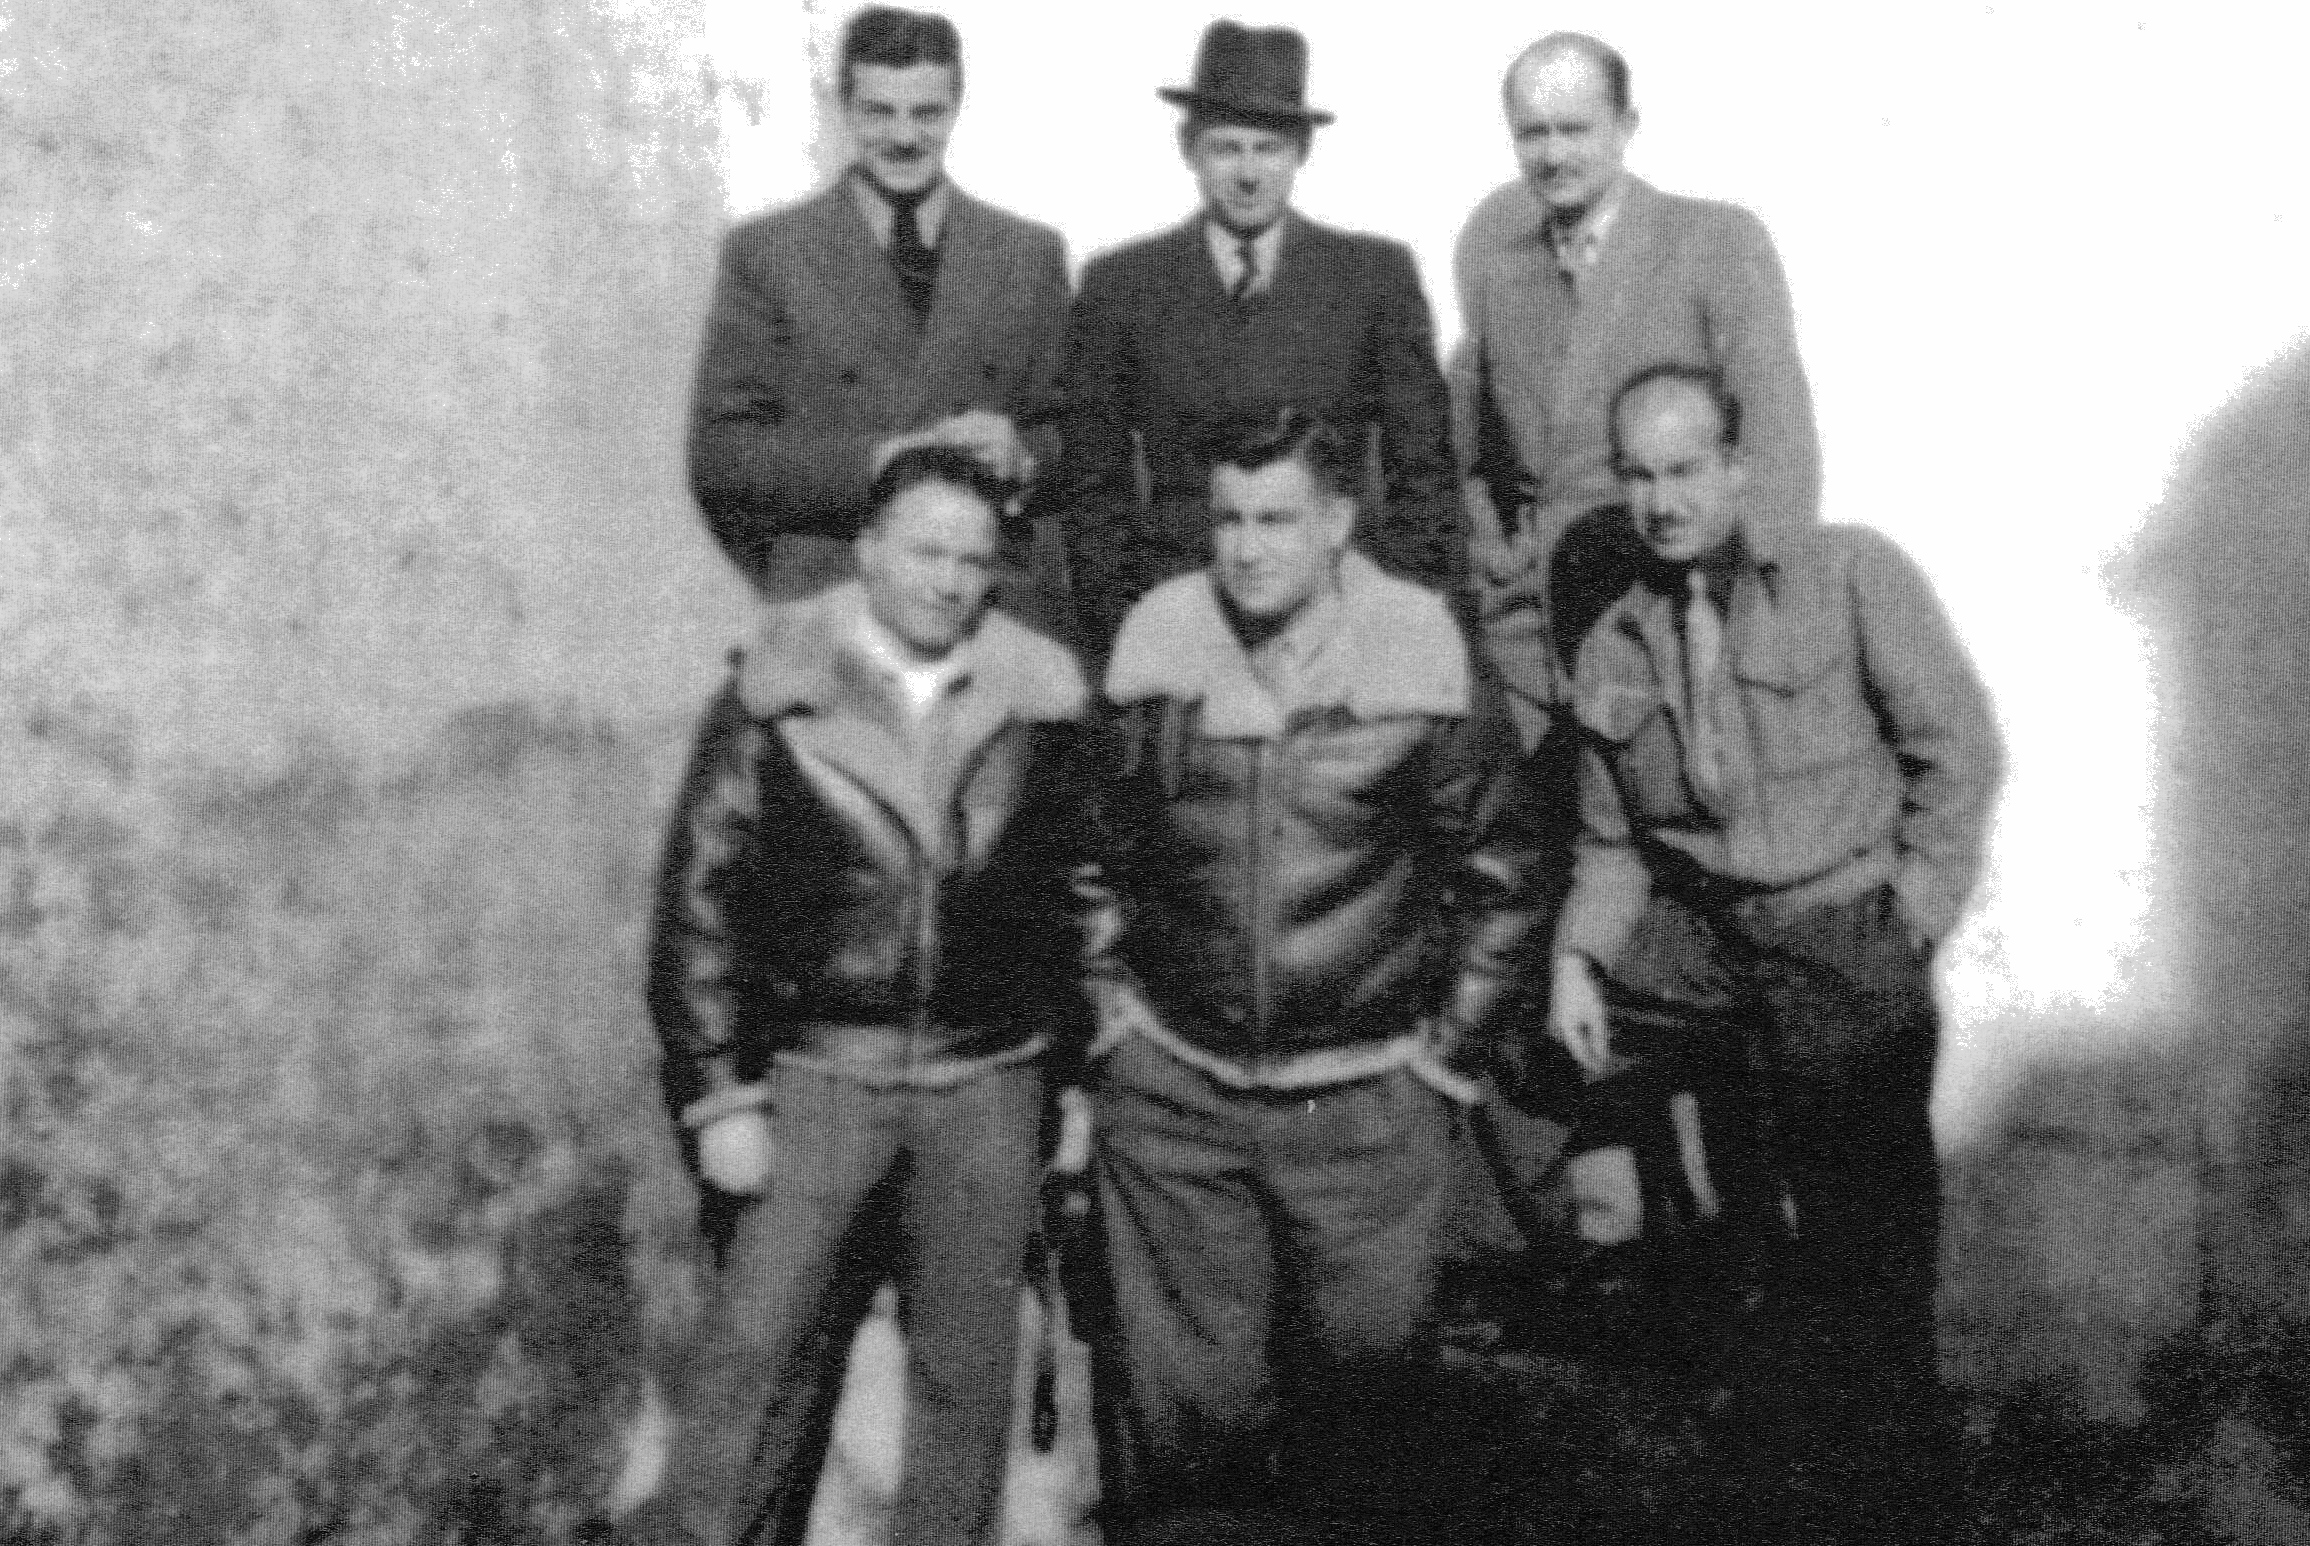 American airmen in Elvas. Moeller is on the back with a civilian suit and a hat. 